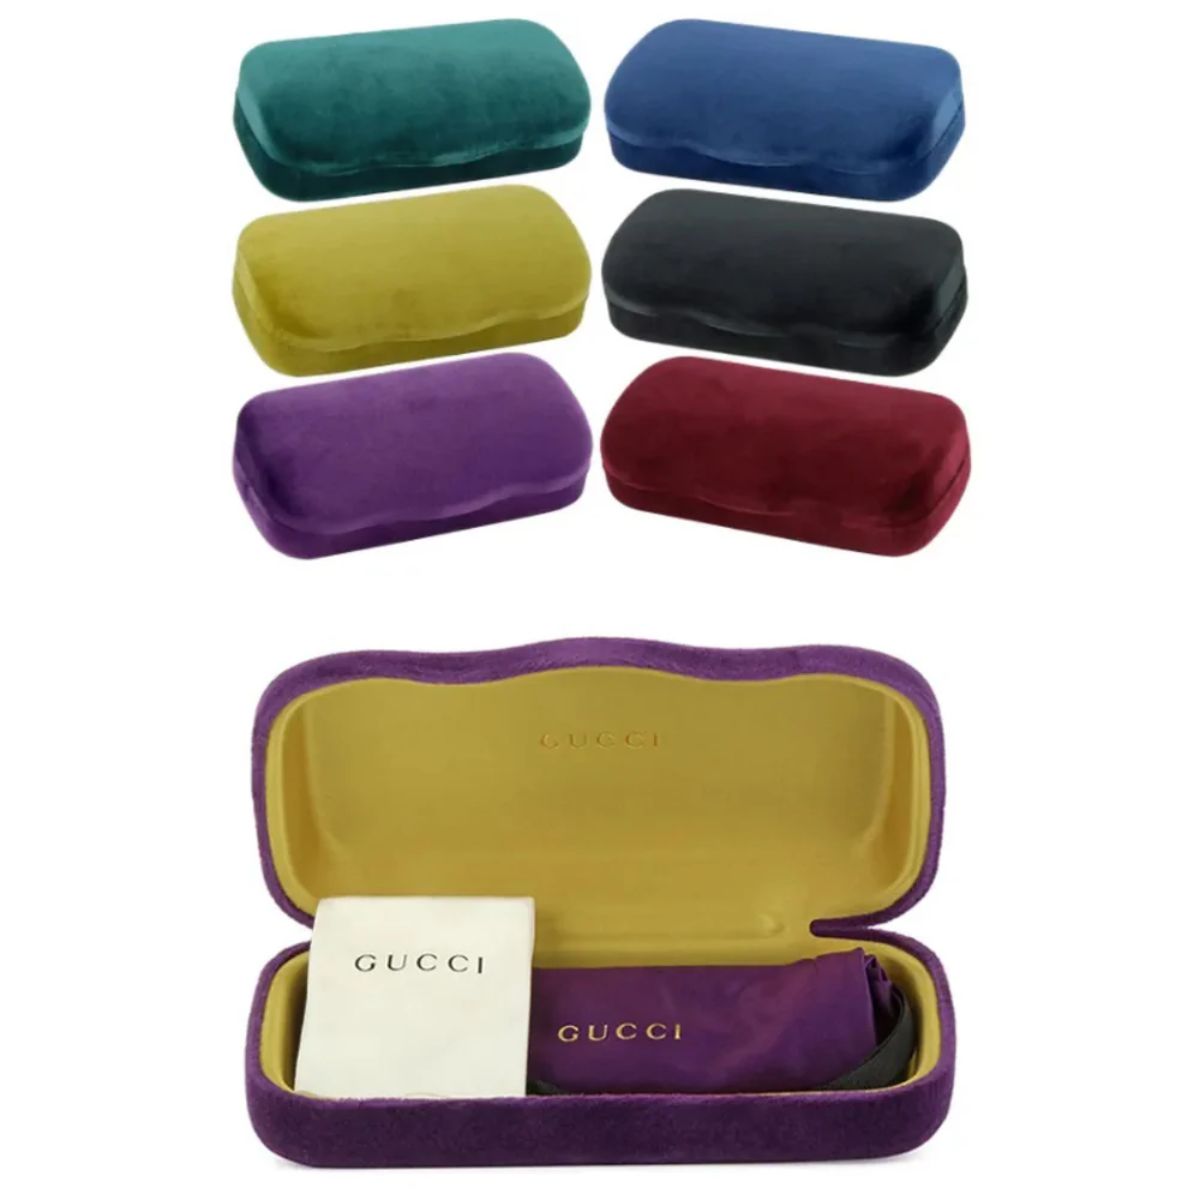 "Available Stylish Gucci  Sunglasses Cases At Optorium"